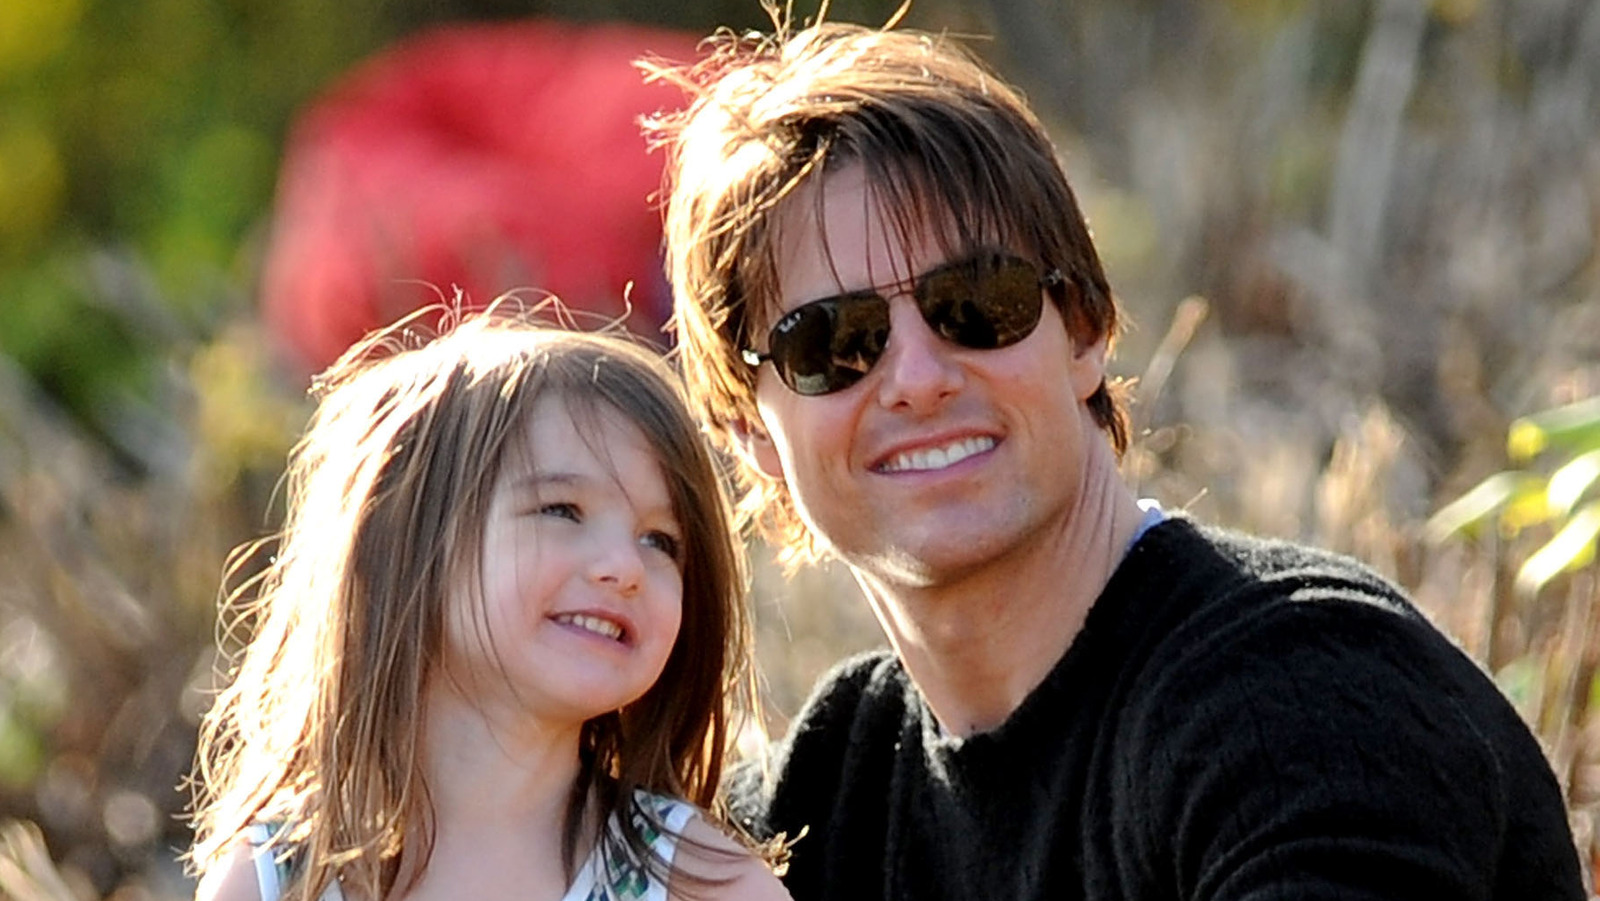 Tom Cruise Gives Clear Sign Daughter Suri's 18th Birthday Isn't On His Radar